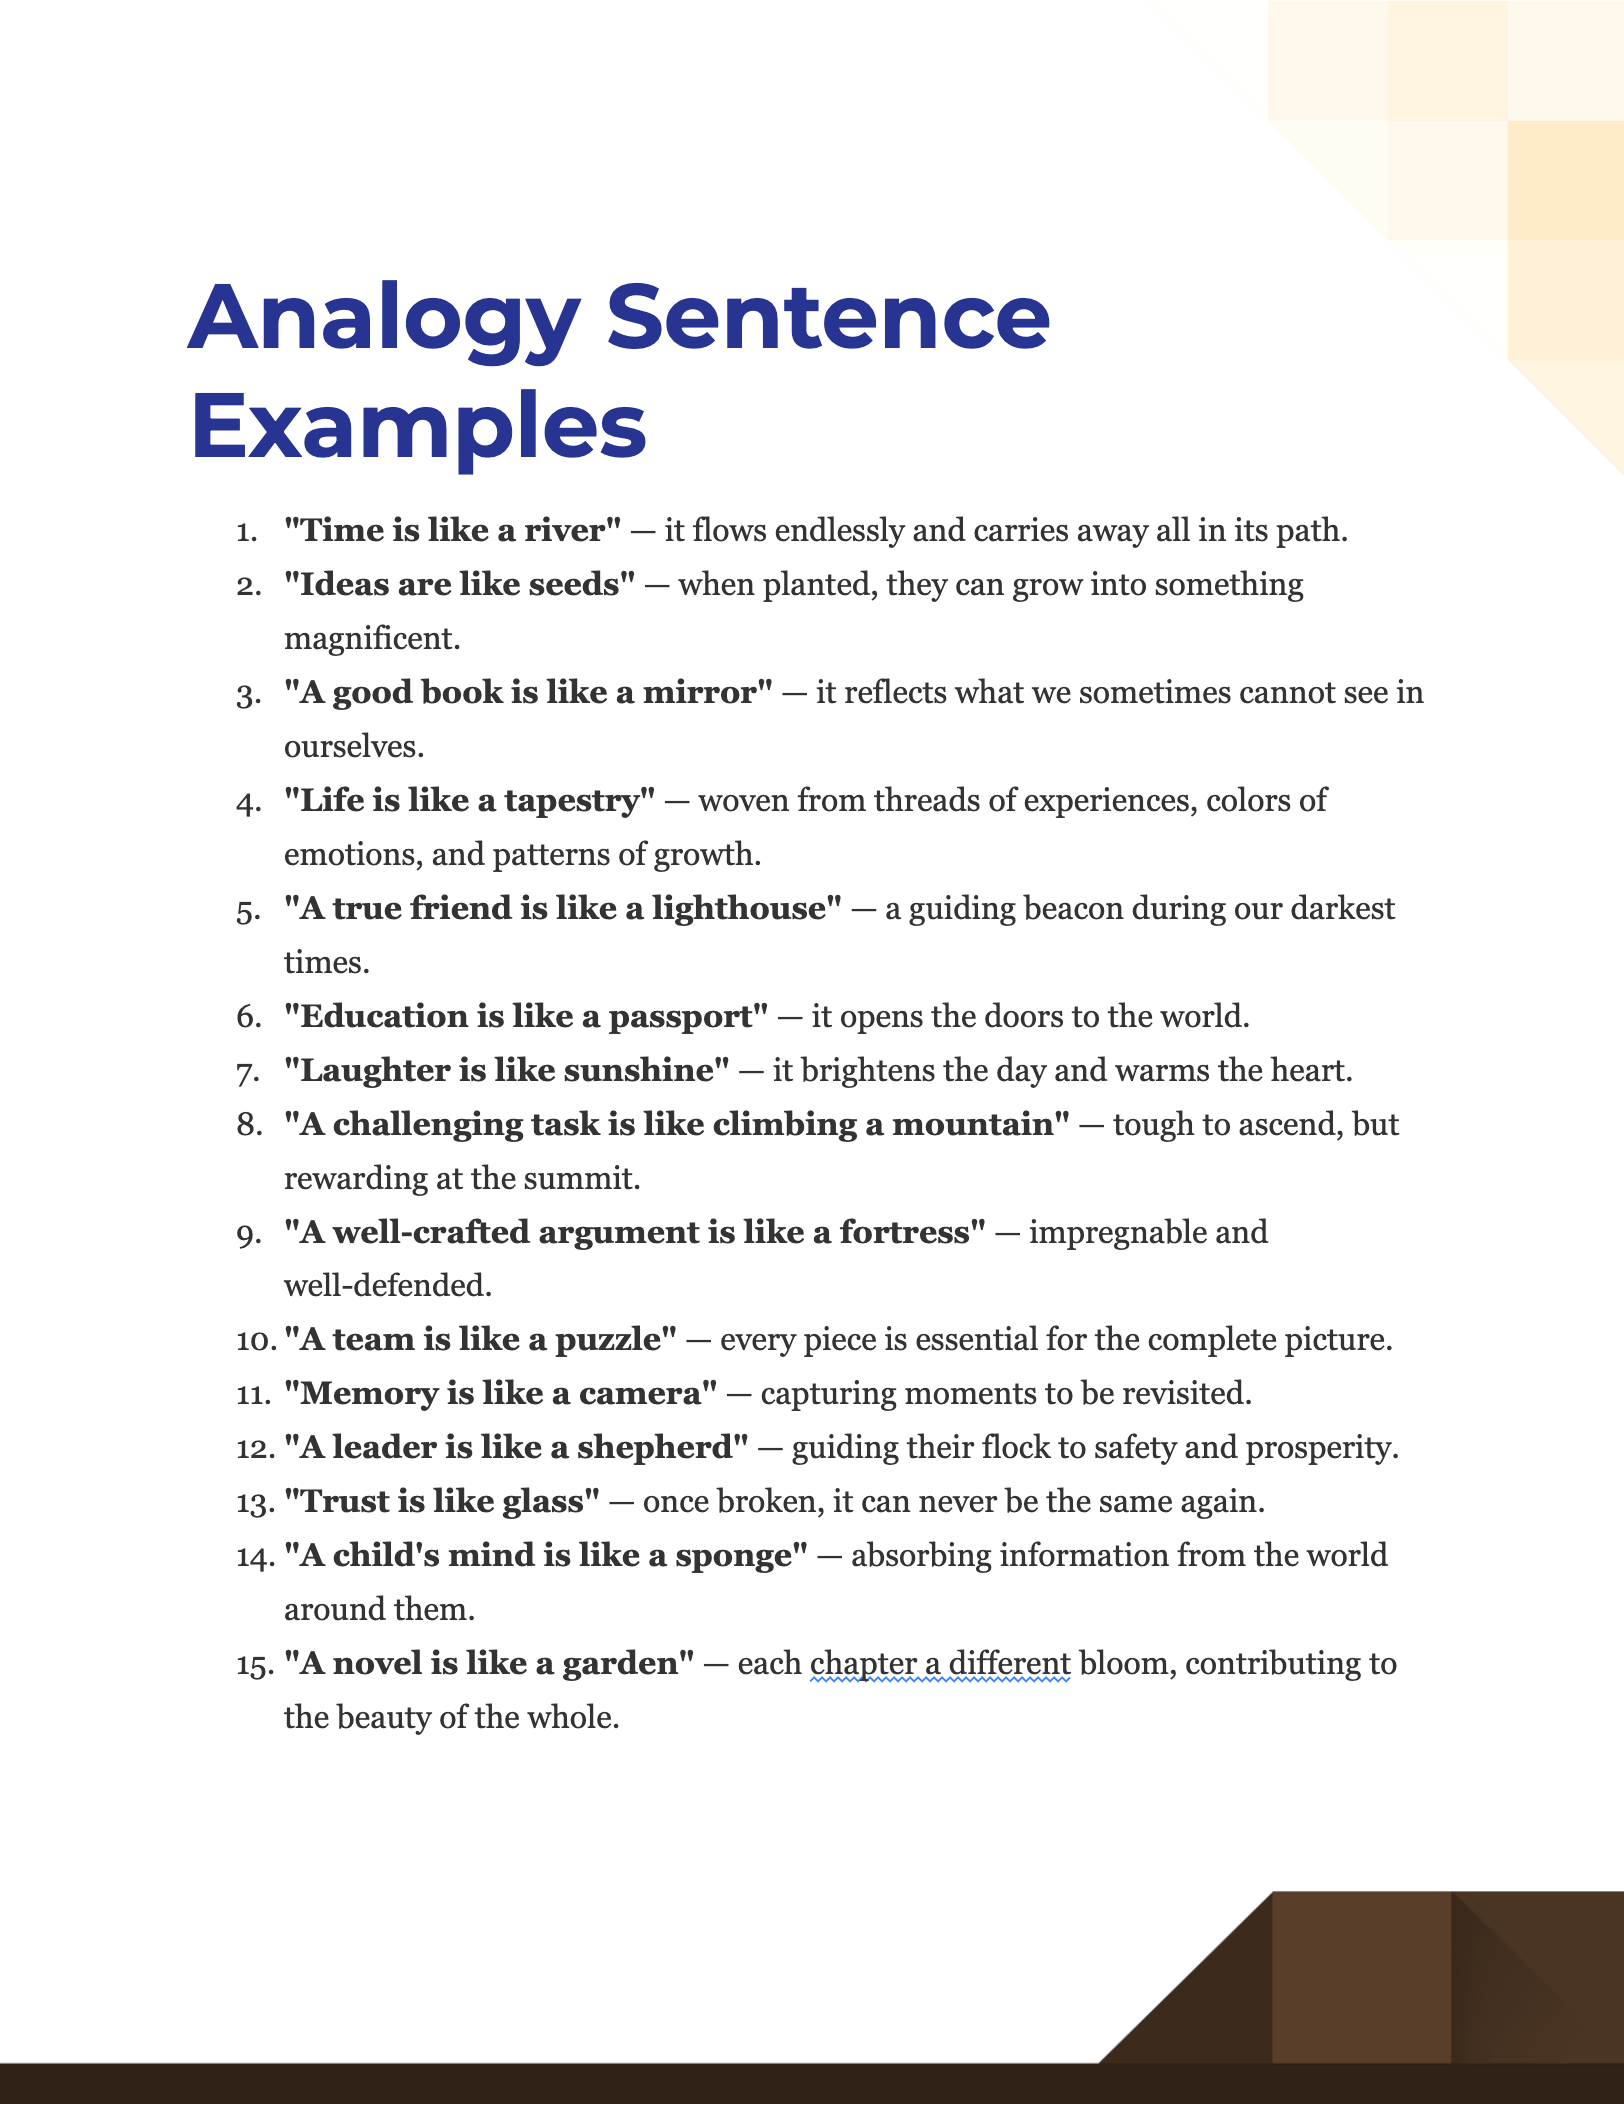 Analogy Sentence Examples